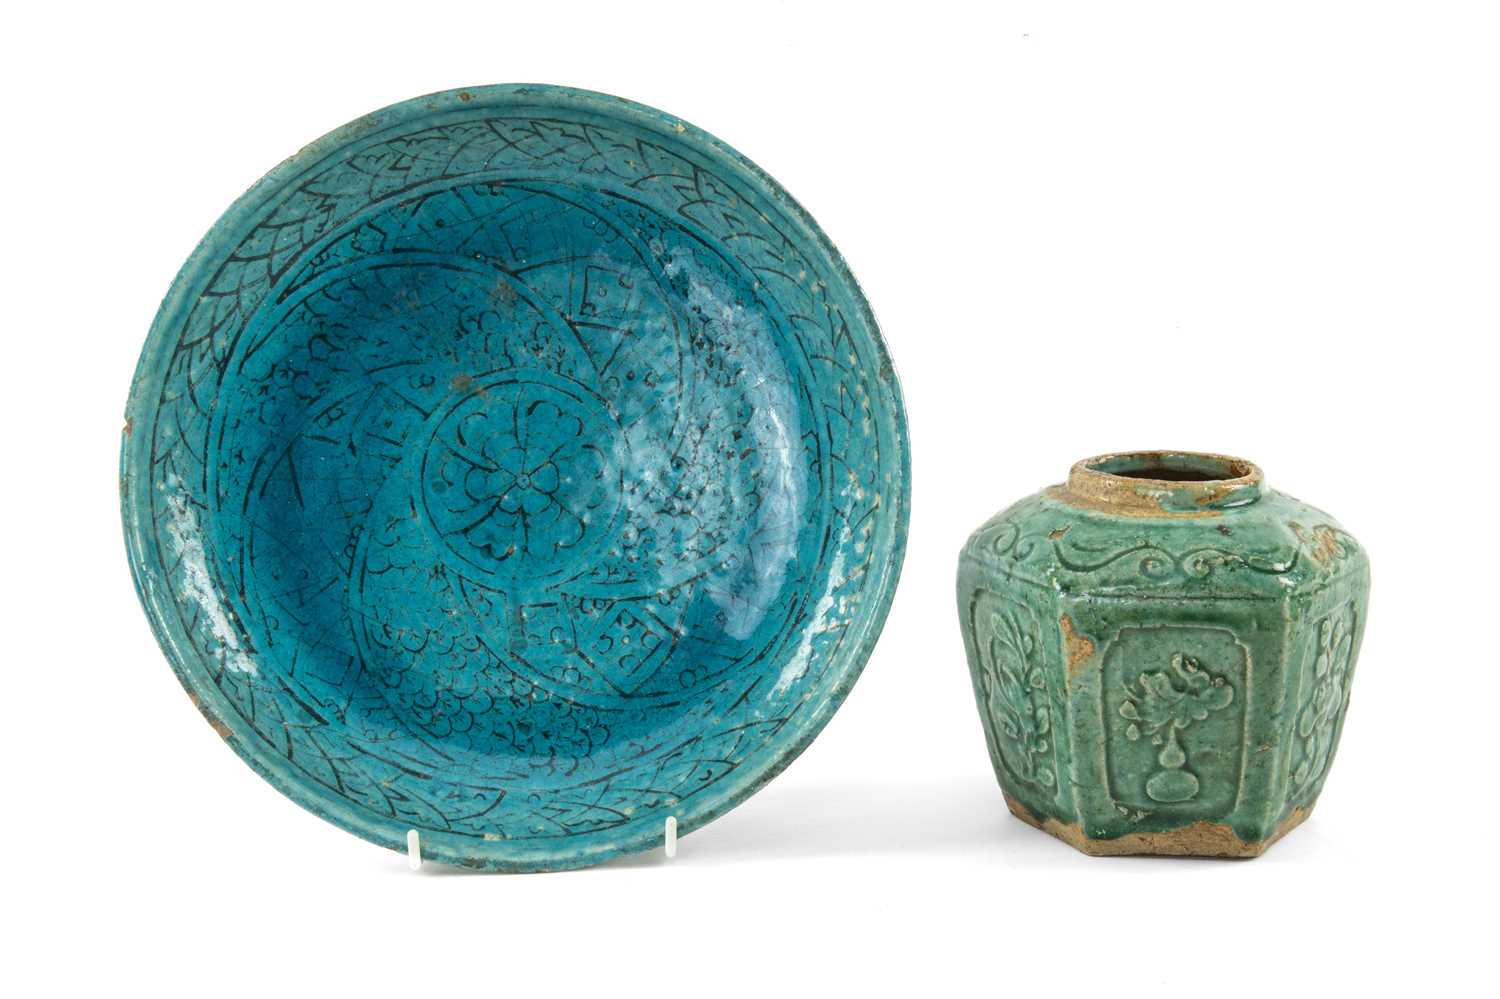 SULTANABAD WARE POTTERY DISH, of shallow rounded form on a short foot, turquoise glaze with stylised